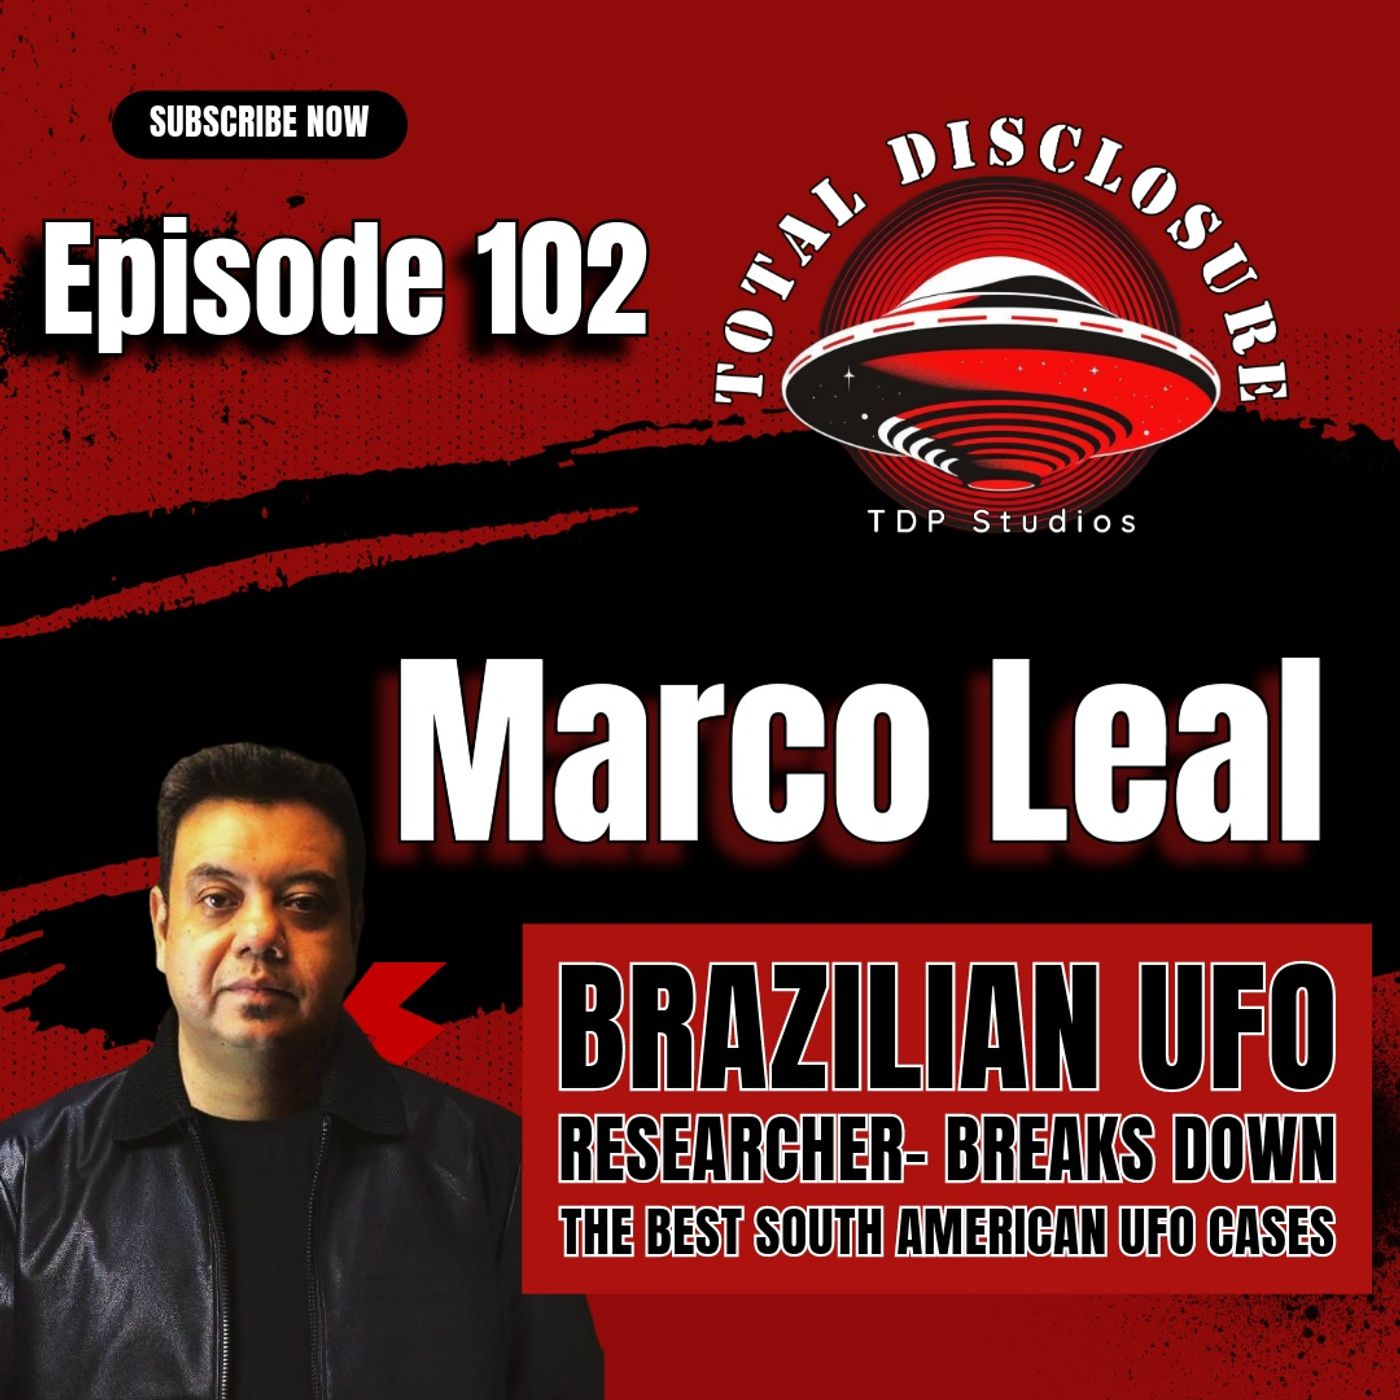 #102- Marco Leal (Brazilian UFO researcher) BREAKS DOWN THE BEST SOUTH AMERICAN UFO CASES- Plus Insight on The 